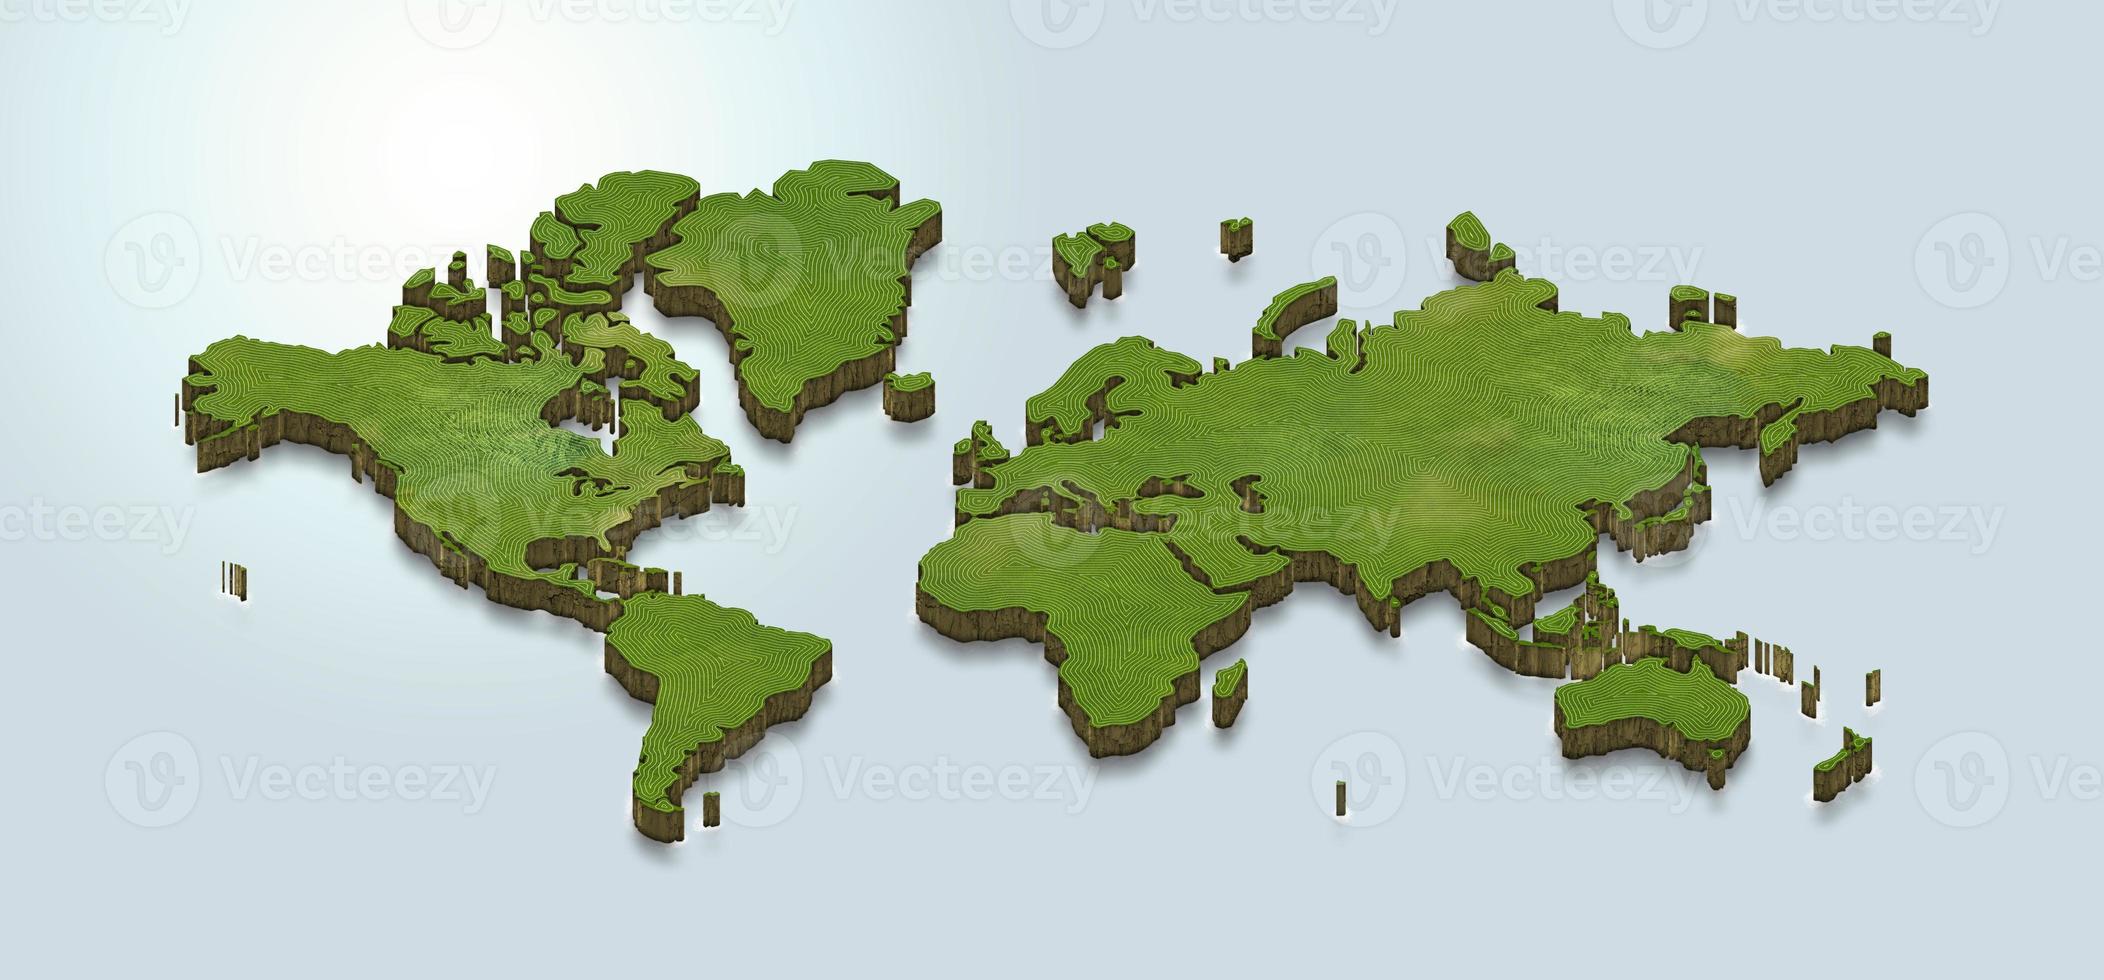 3D map illustration of the world photo